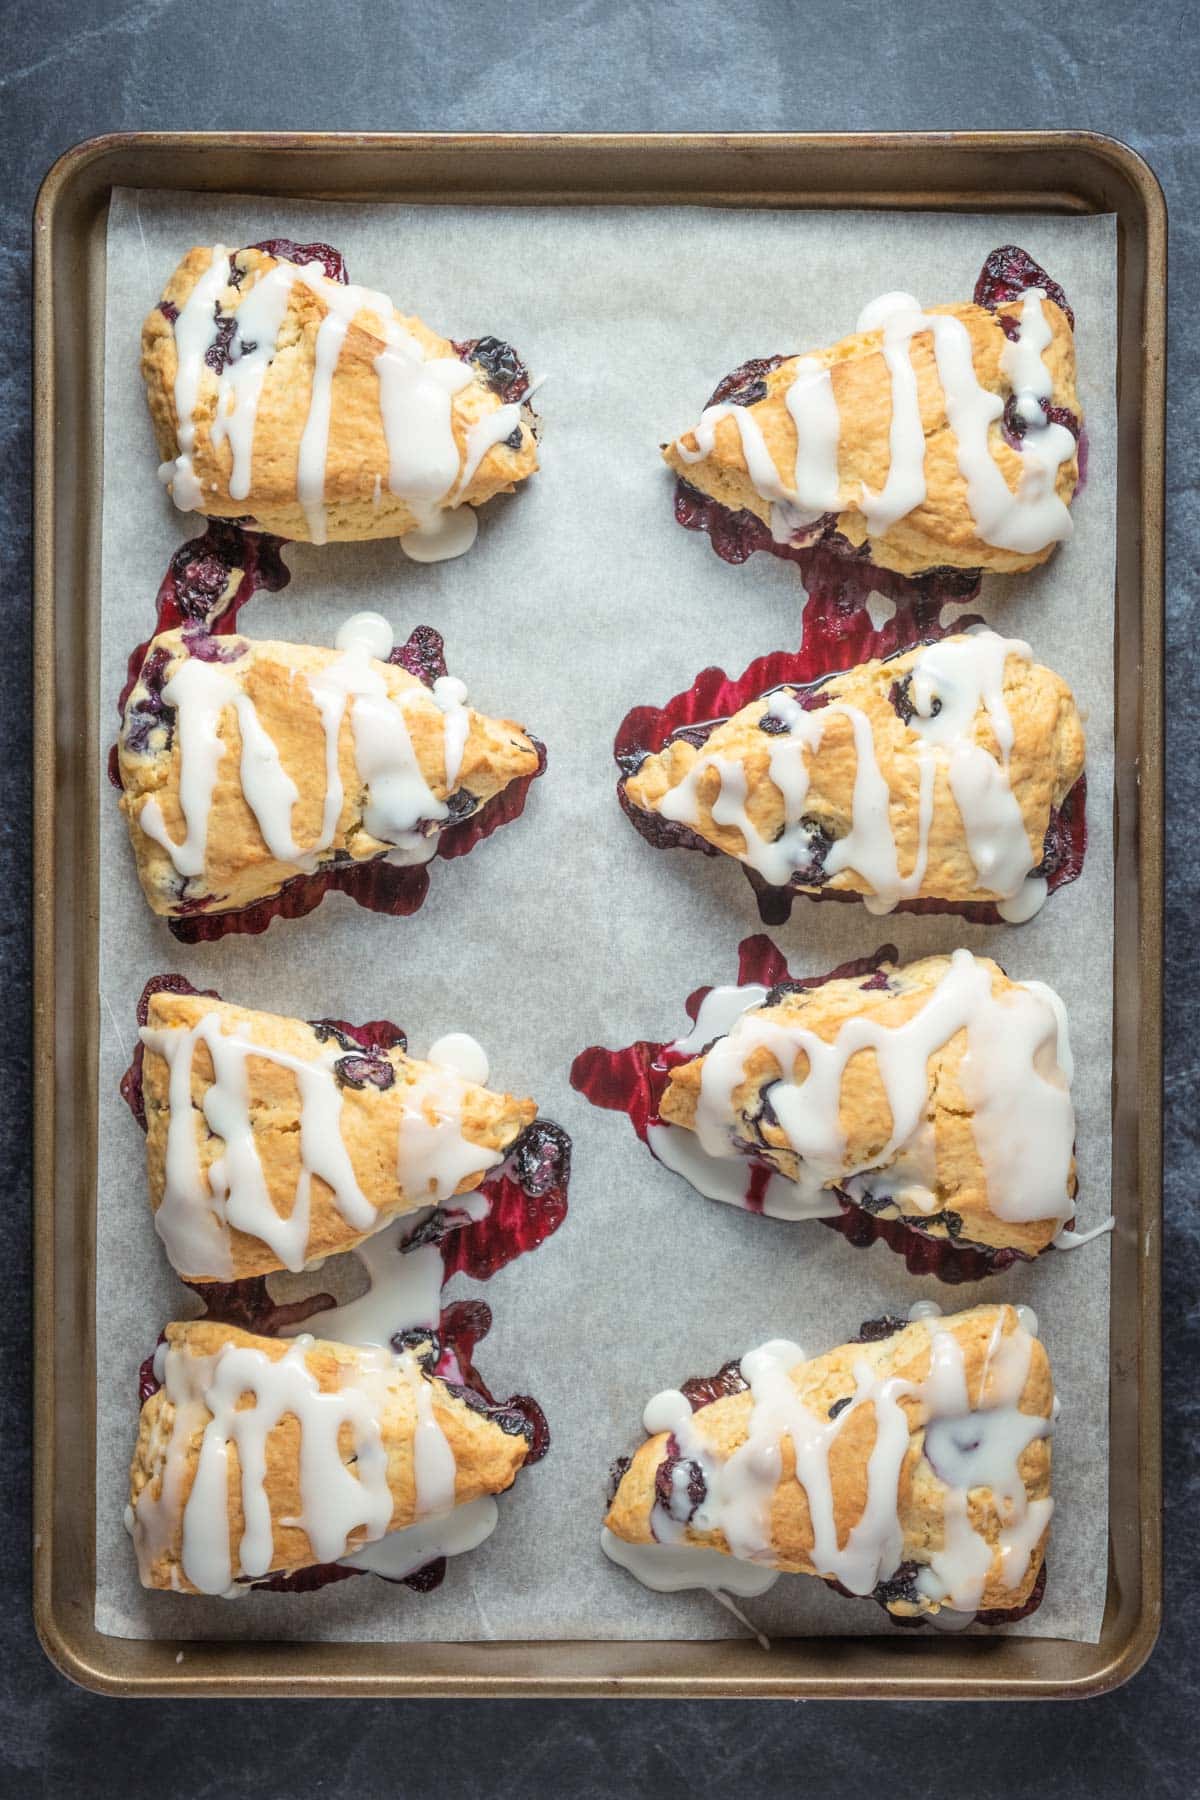 Glazed vegan blueberry scones on a parchment lined baking sheet.